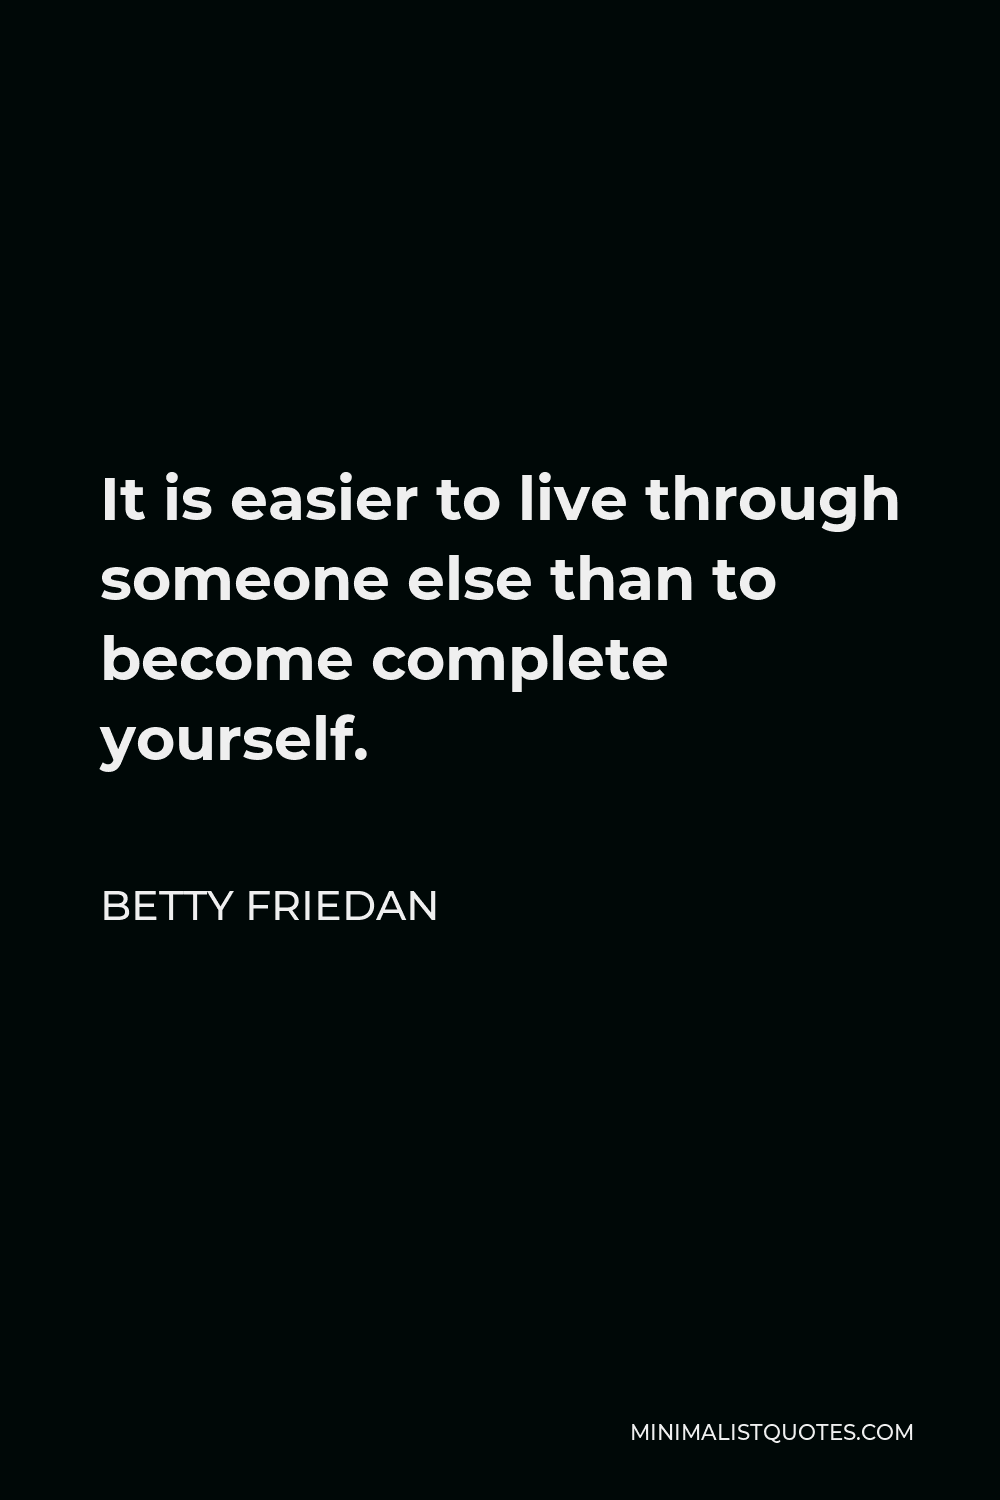 Betty Friedan Quote - It is easier to live through someone else than to become complete yourself.